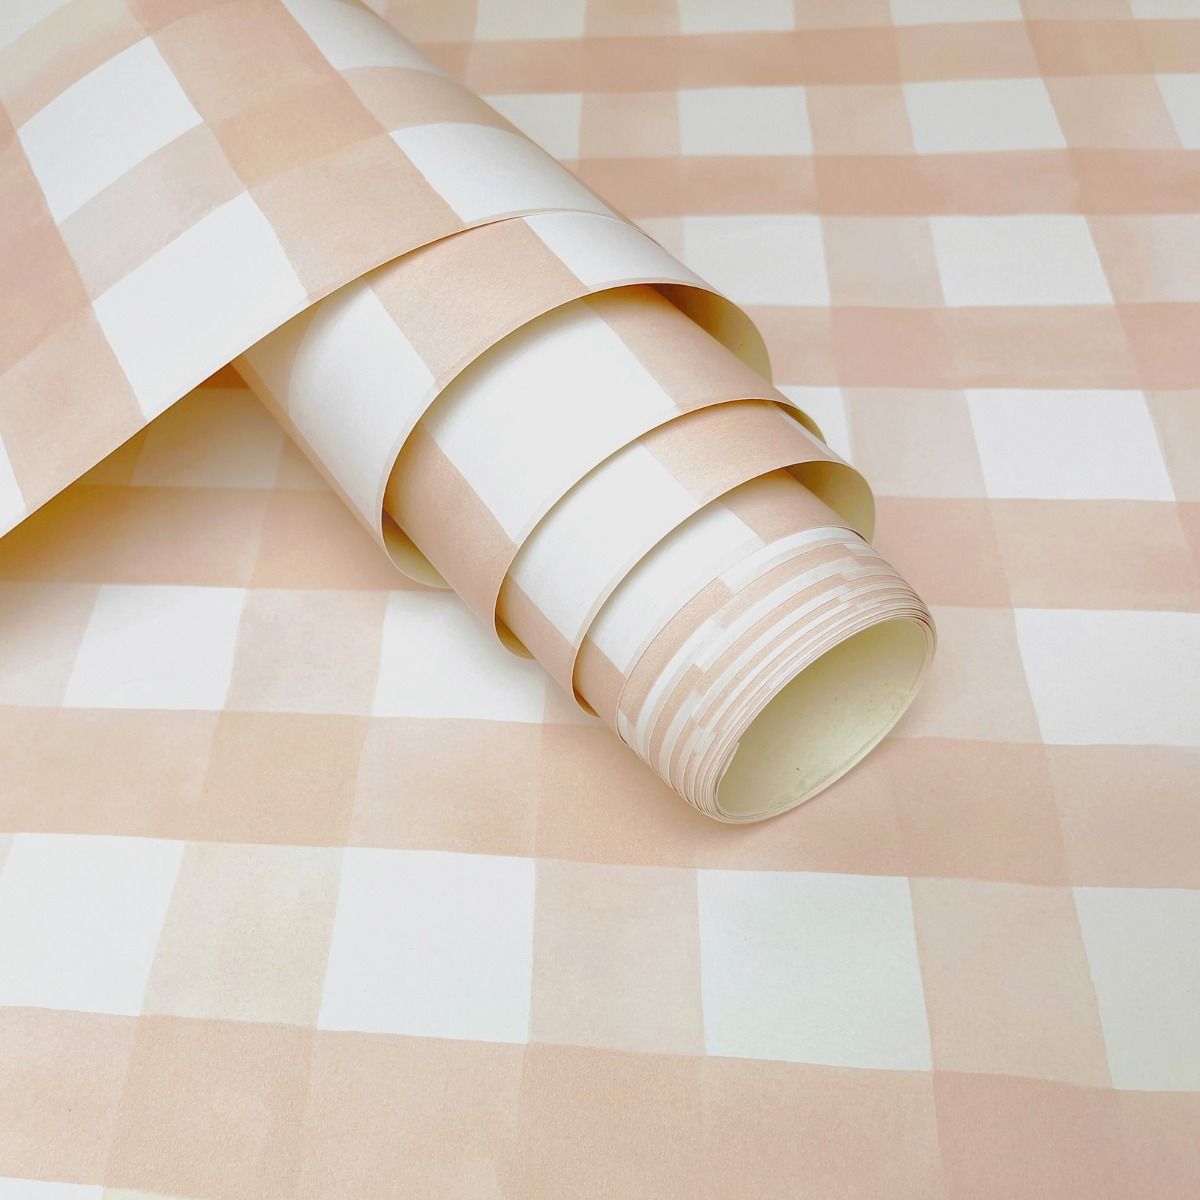 Watercolour Gingham Wallpaper Soft Coral Holden 13292